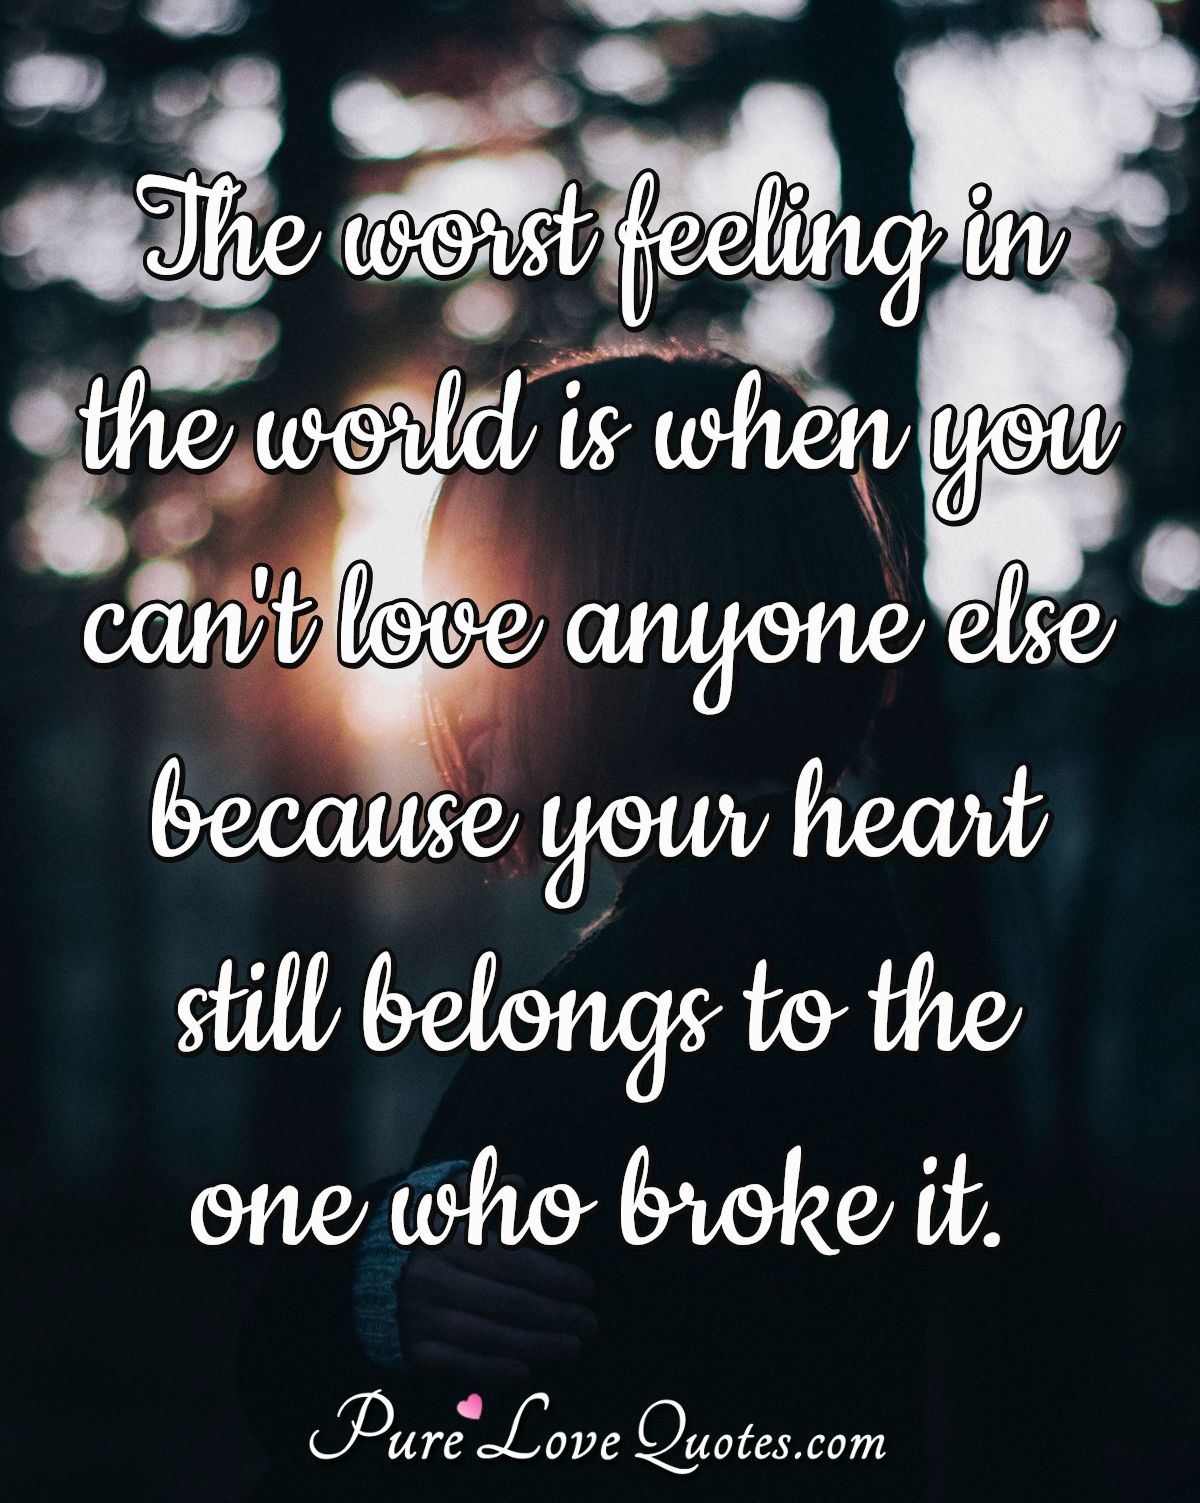 The worst feeling in the world is when you can't love anyone else because your heart still belongs to the one who broke it. - Anonymous